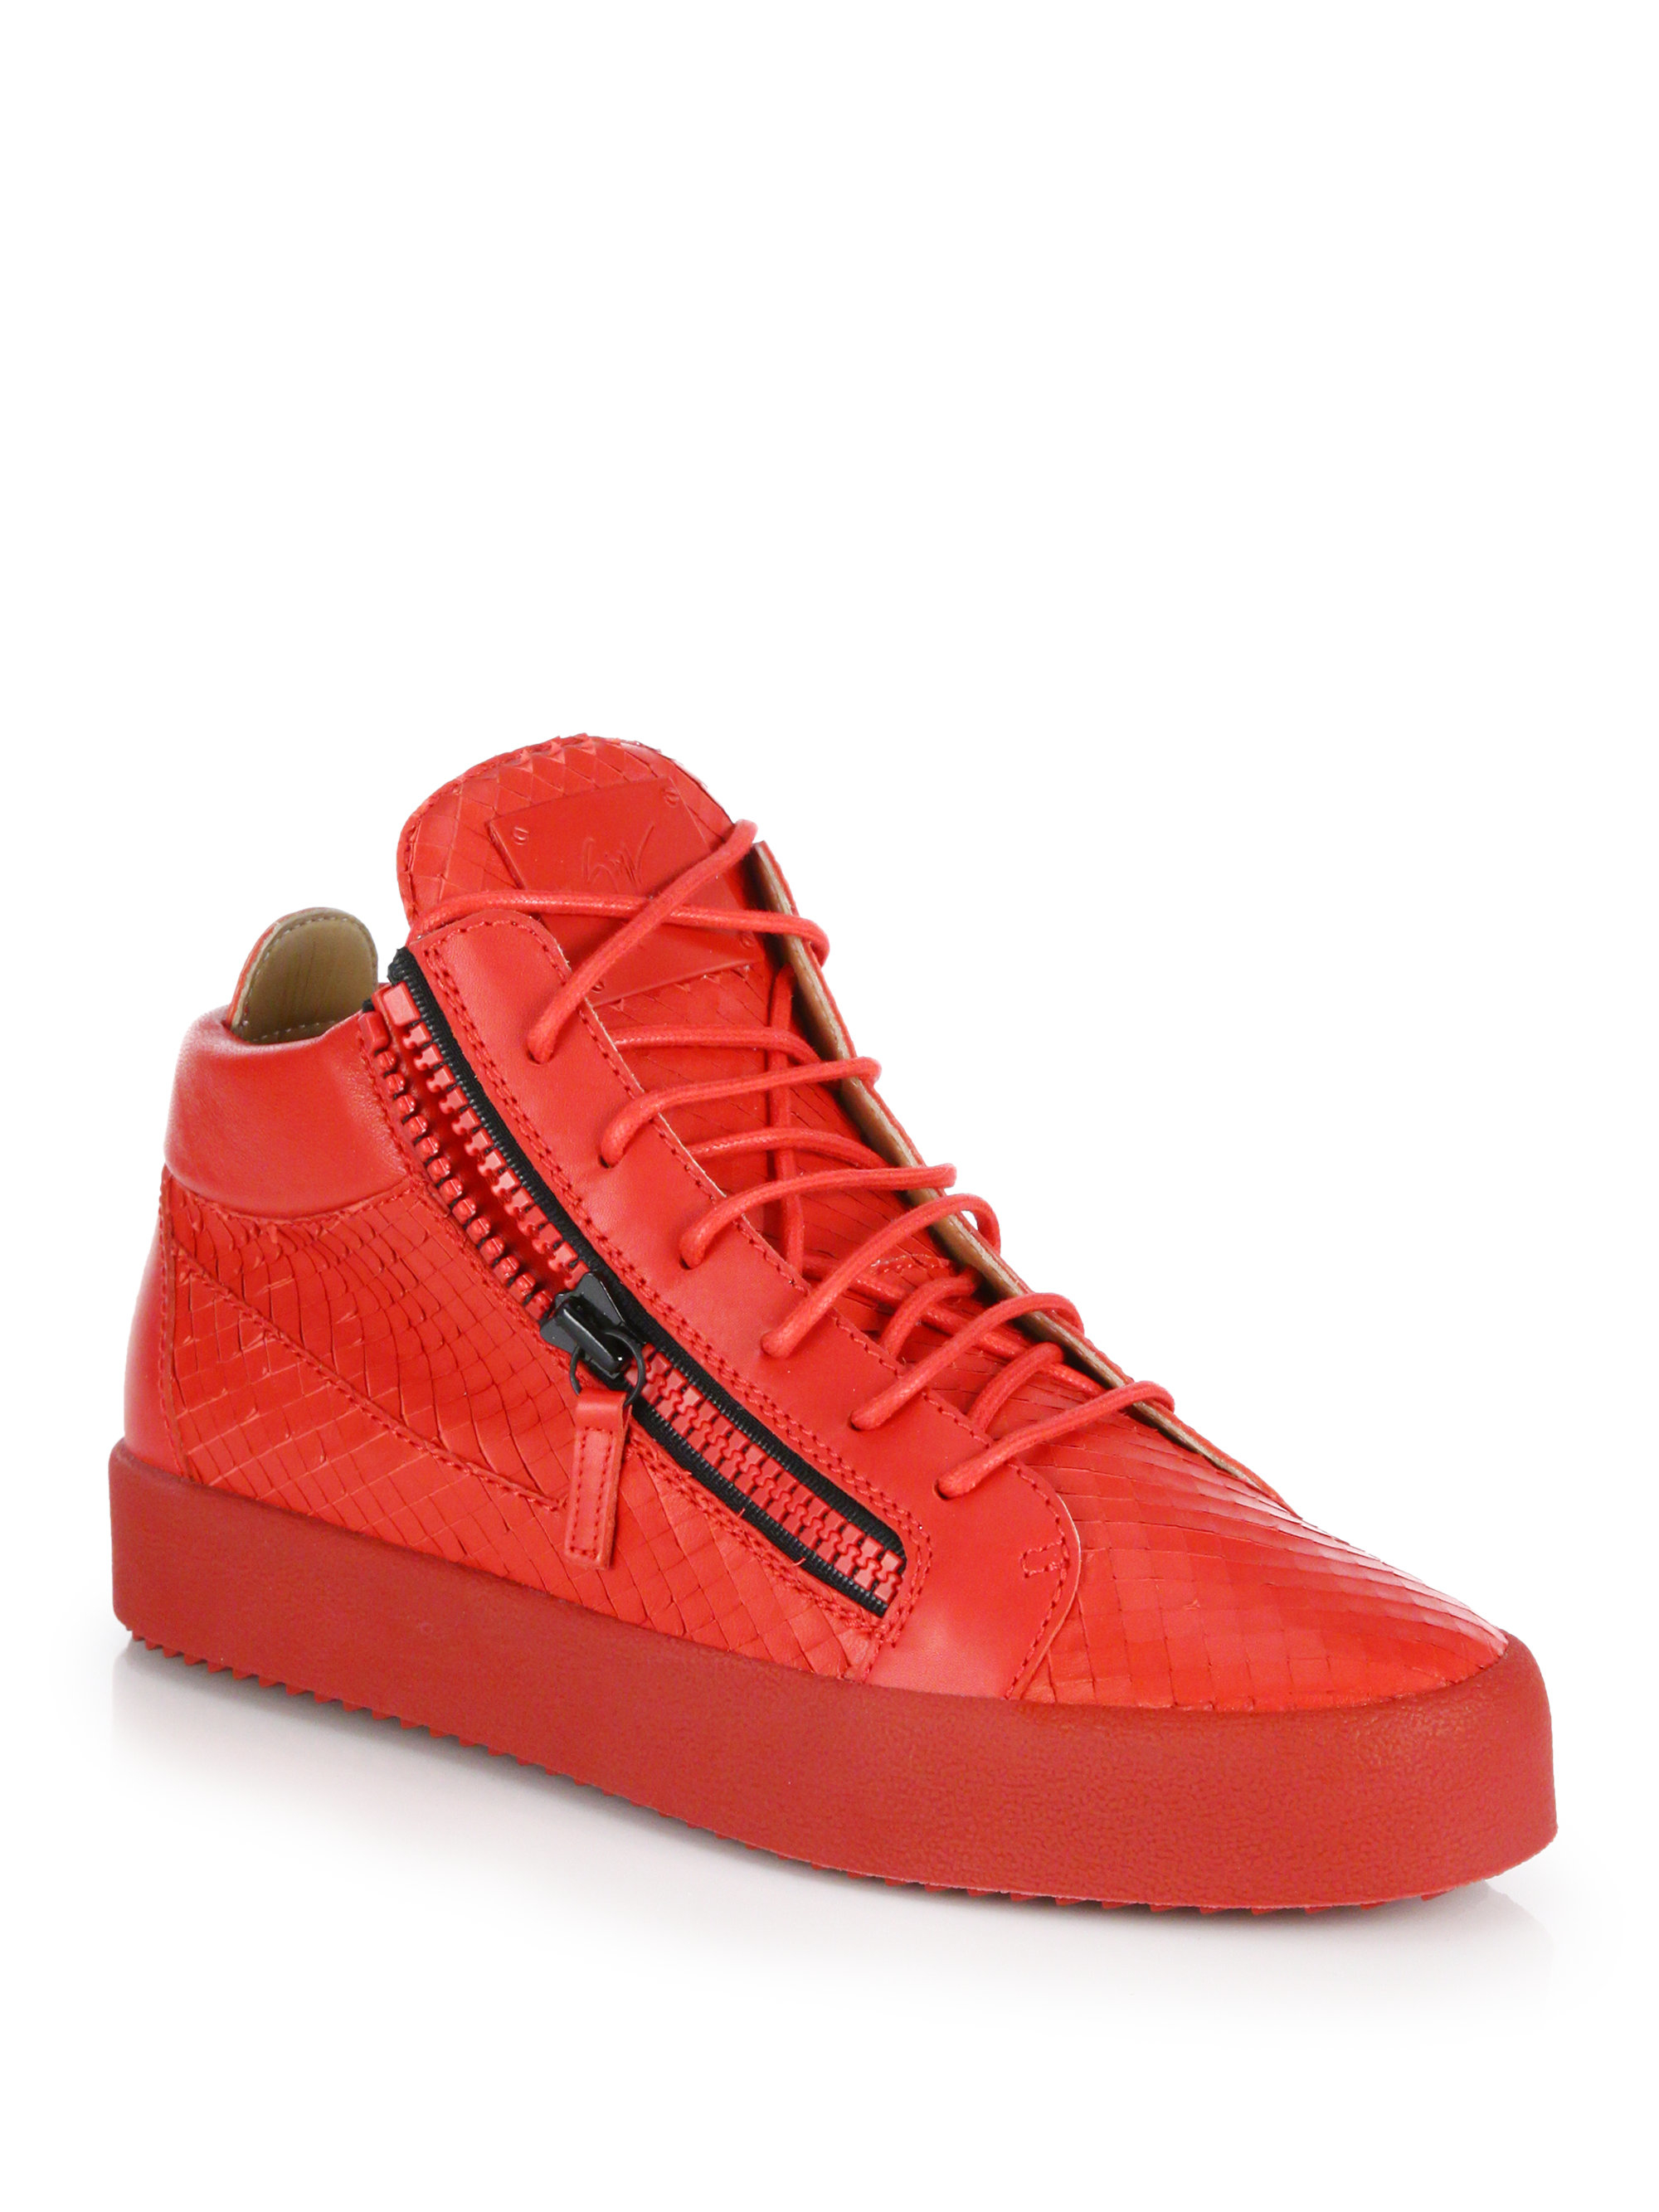 Giuseppe zanotti Snake-print Leather Mid-top Sneakers in Red for Men | Lyst